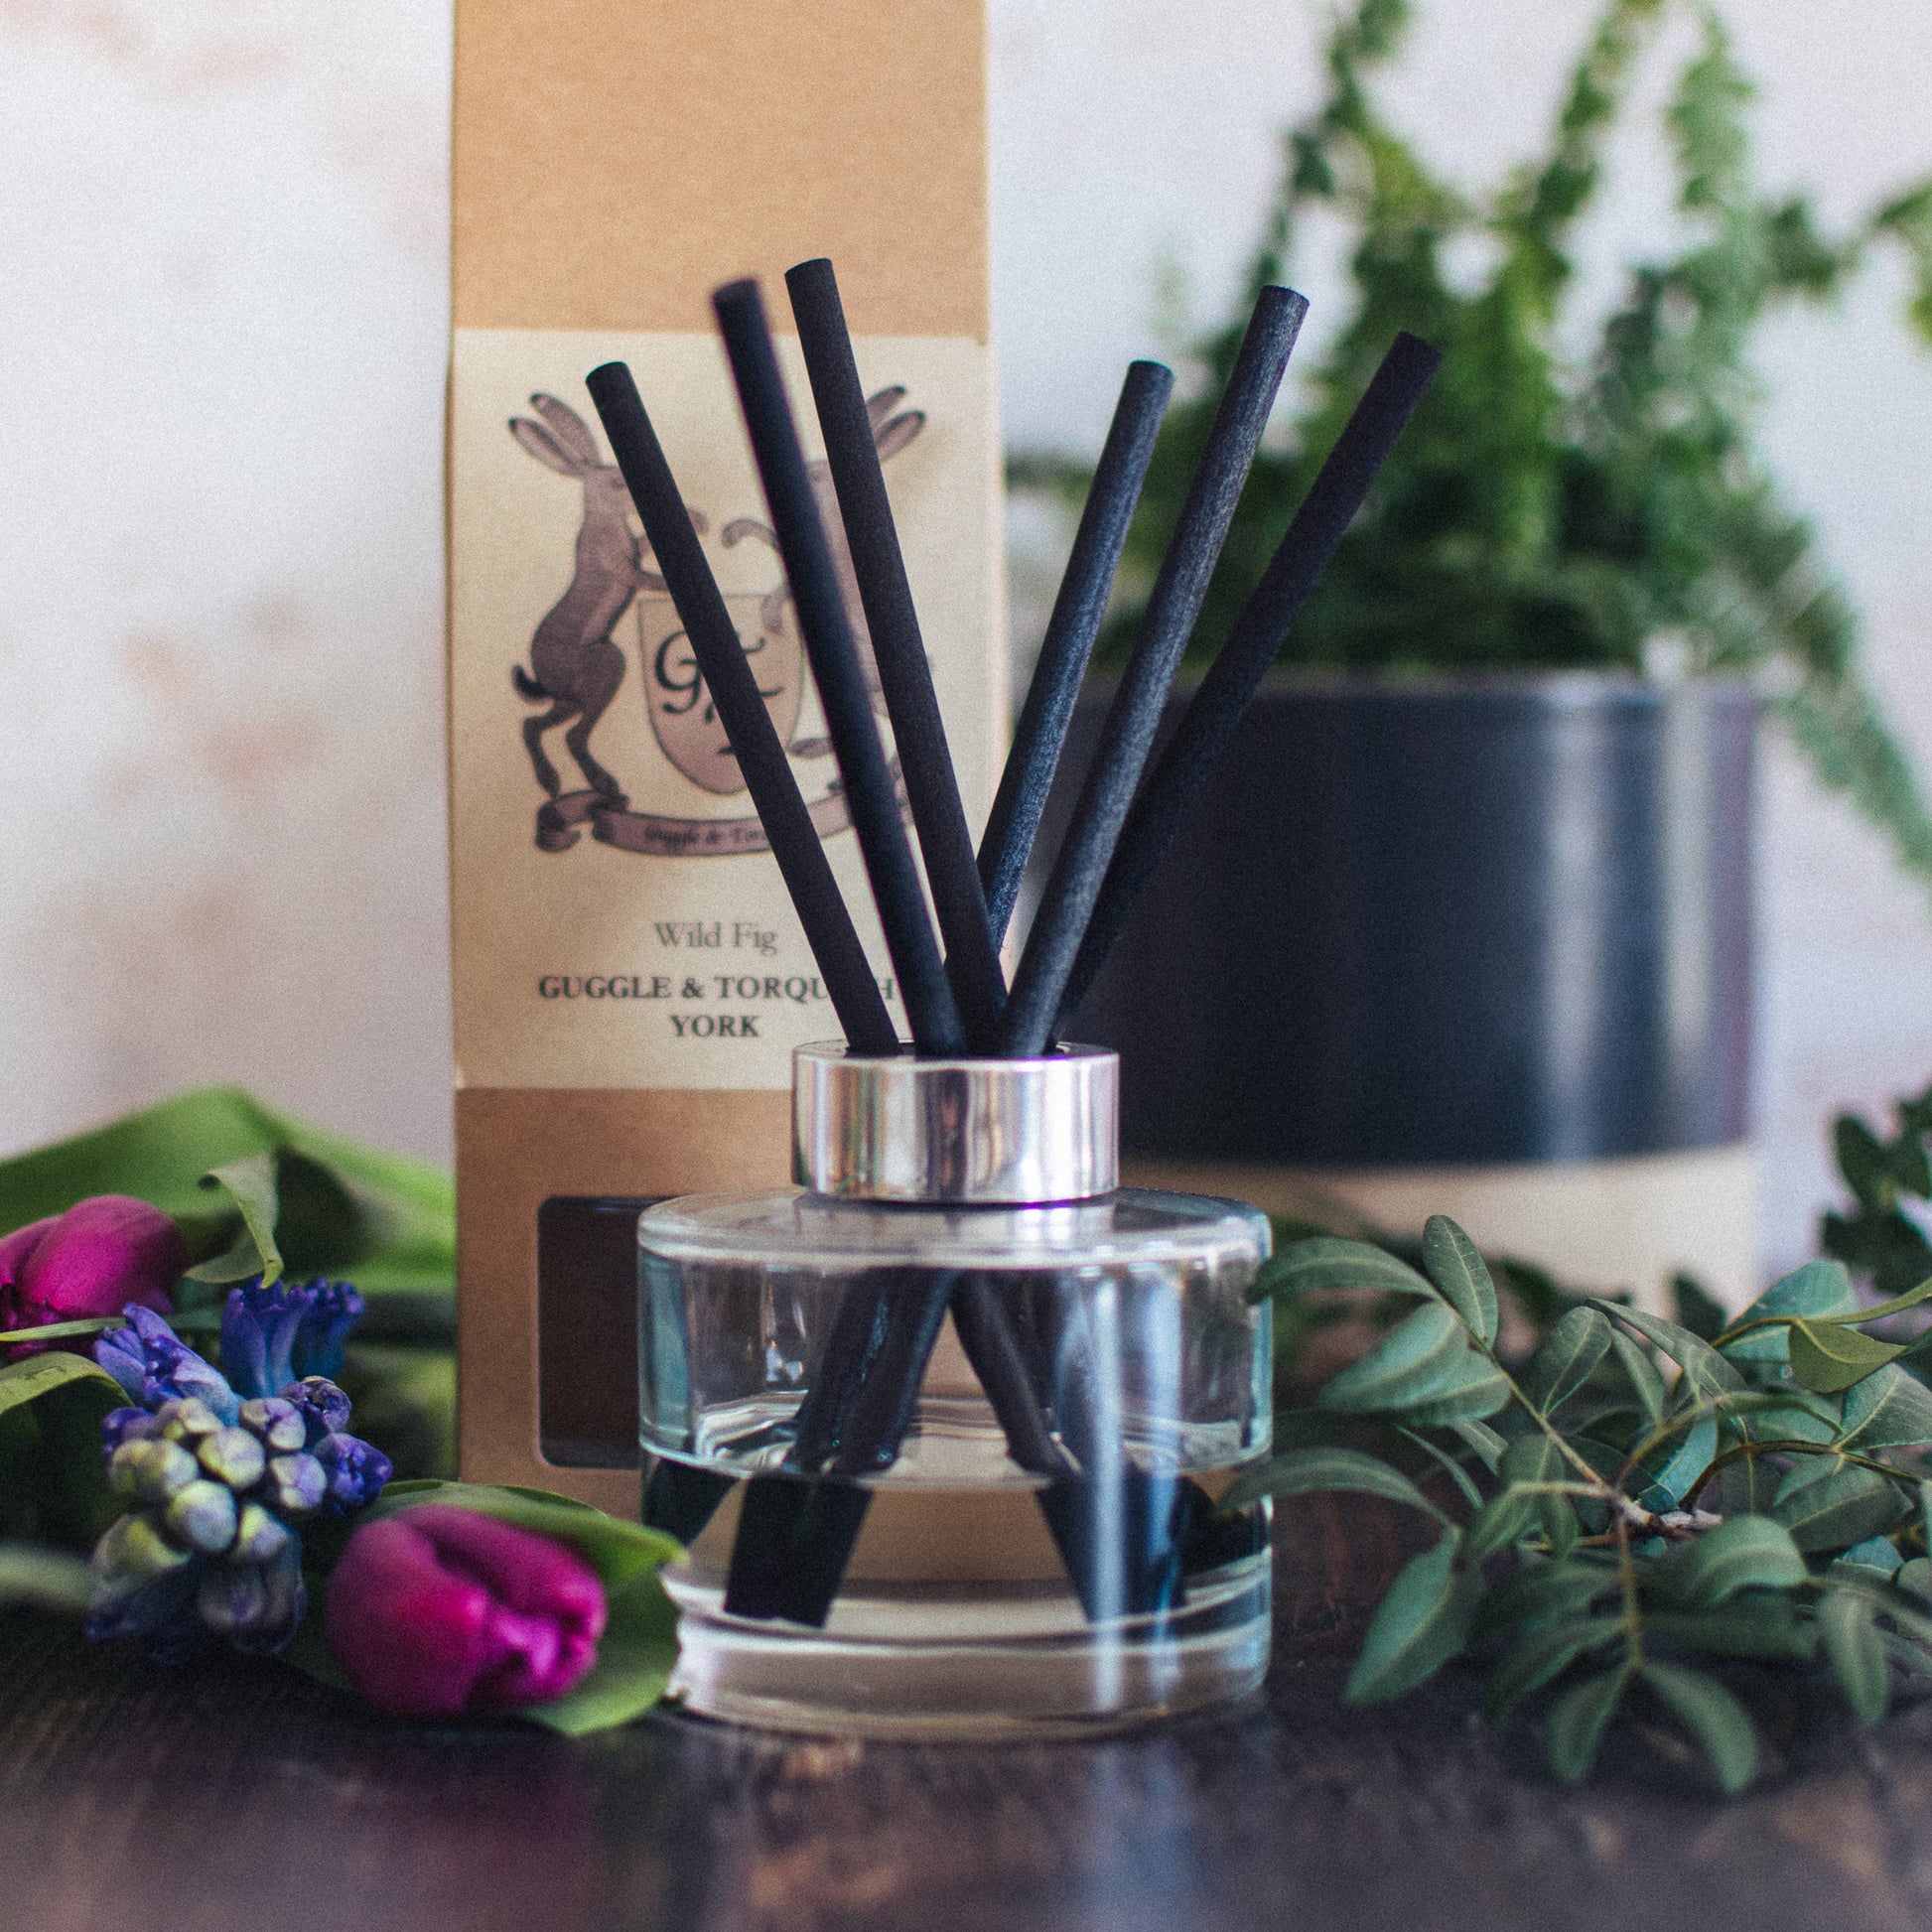 Guggle and Torquith Wild Fig Reed Diffuser - Featuring spring fllowers and foliage